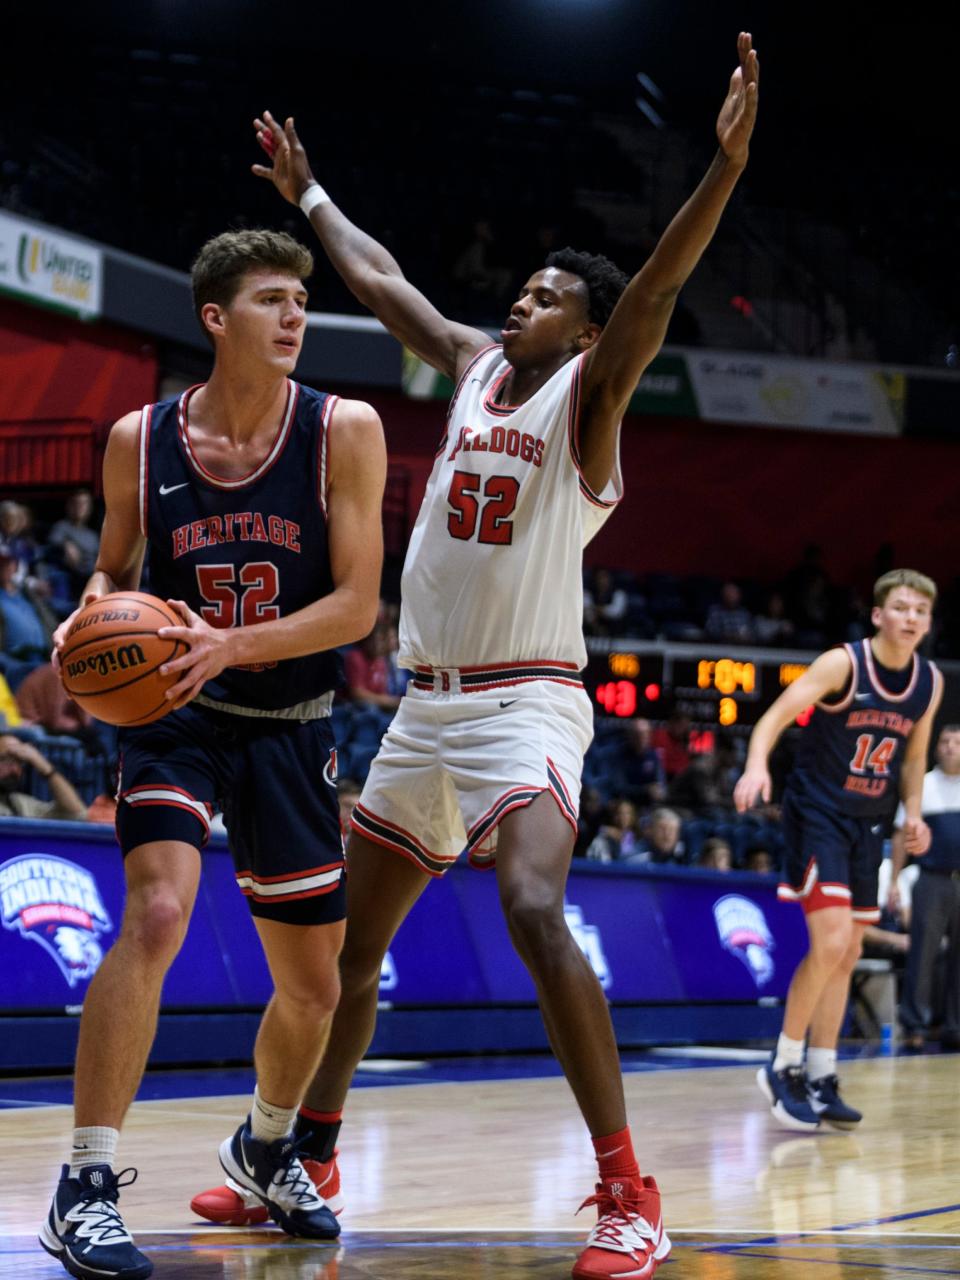 Heritage Hills’ Blake Sisley (52) looks to make a pass around Bosse’s Kiyron Powell (52) during the third quarter of the River City Showcase at Screaming Eagles Arena in Evansville, Ind., Tuesday, Dec. 10, 2019. The Bosse Bulldogs fell to the Heritage Hills Patriots, 82-68.